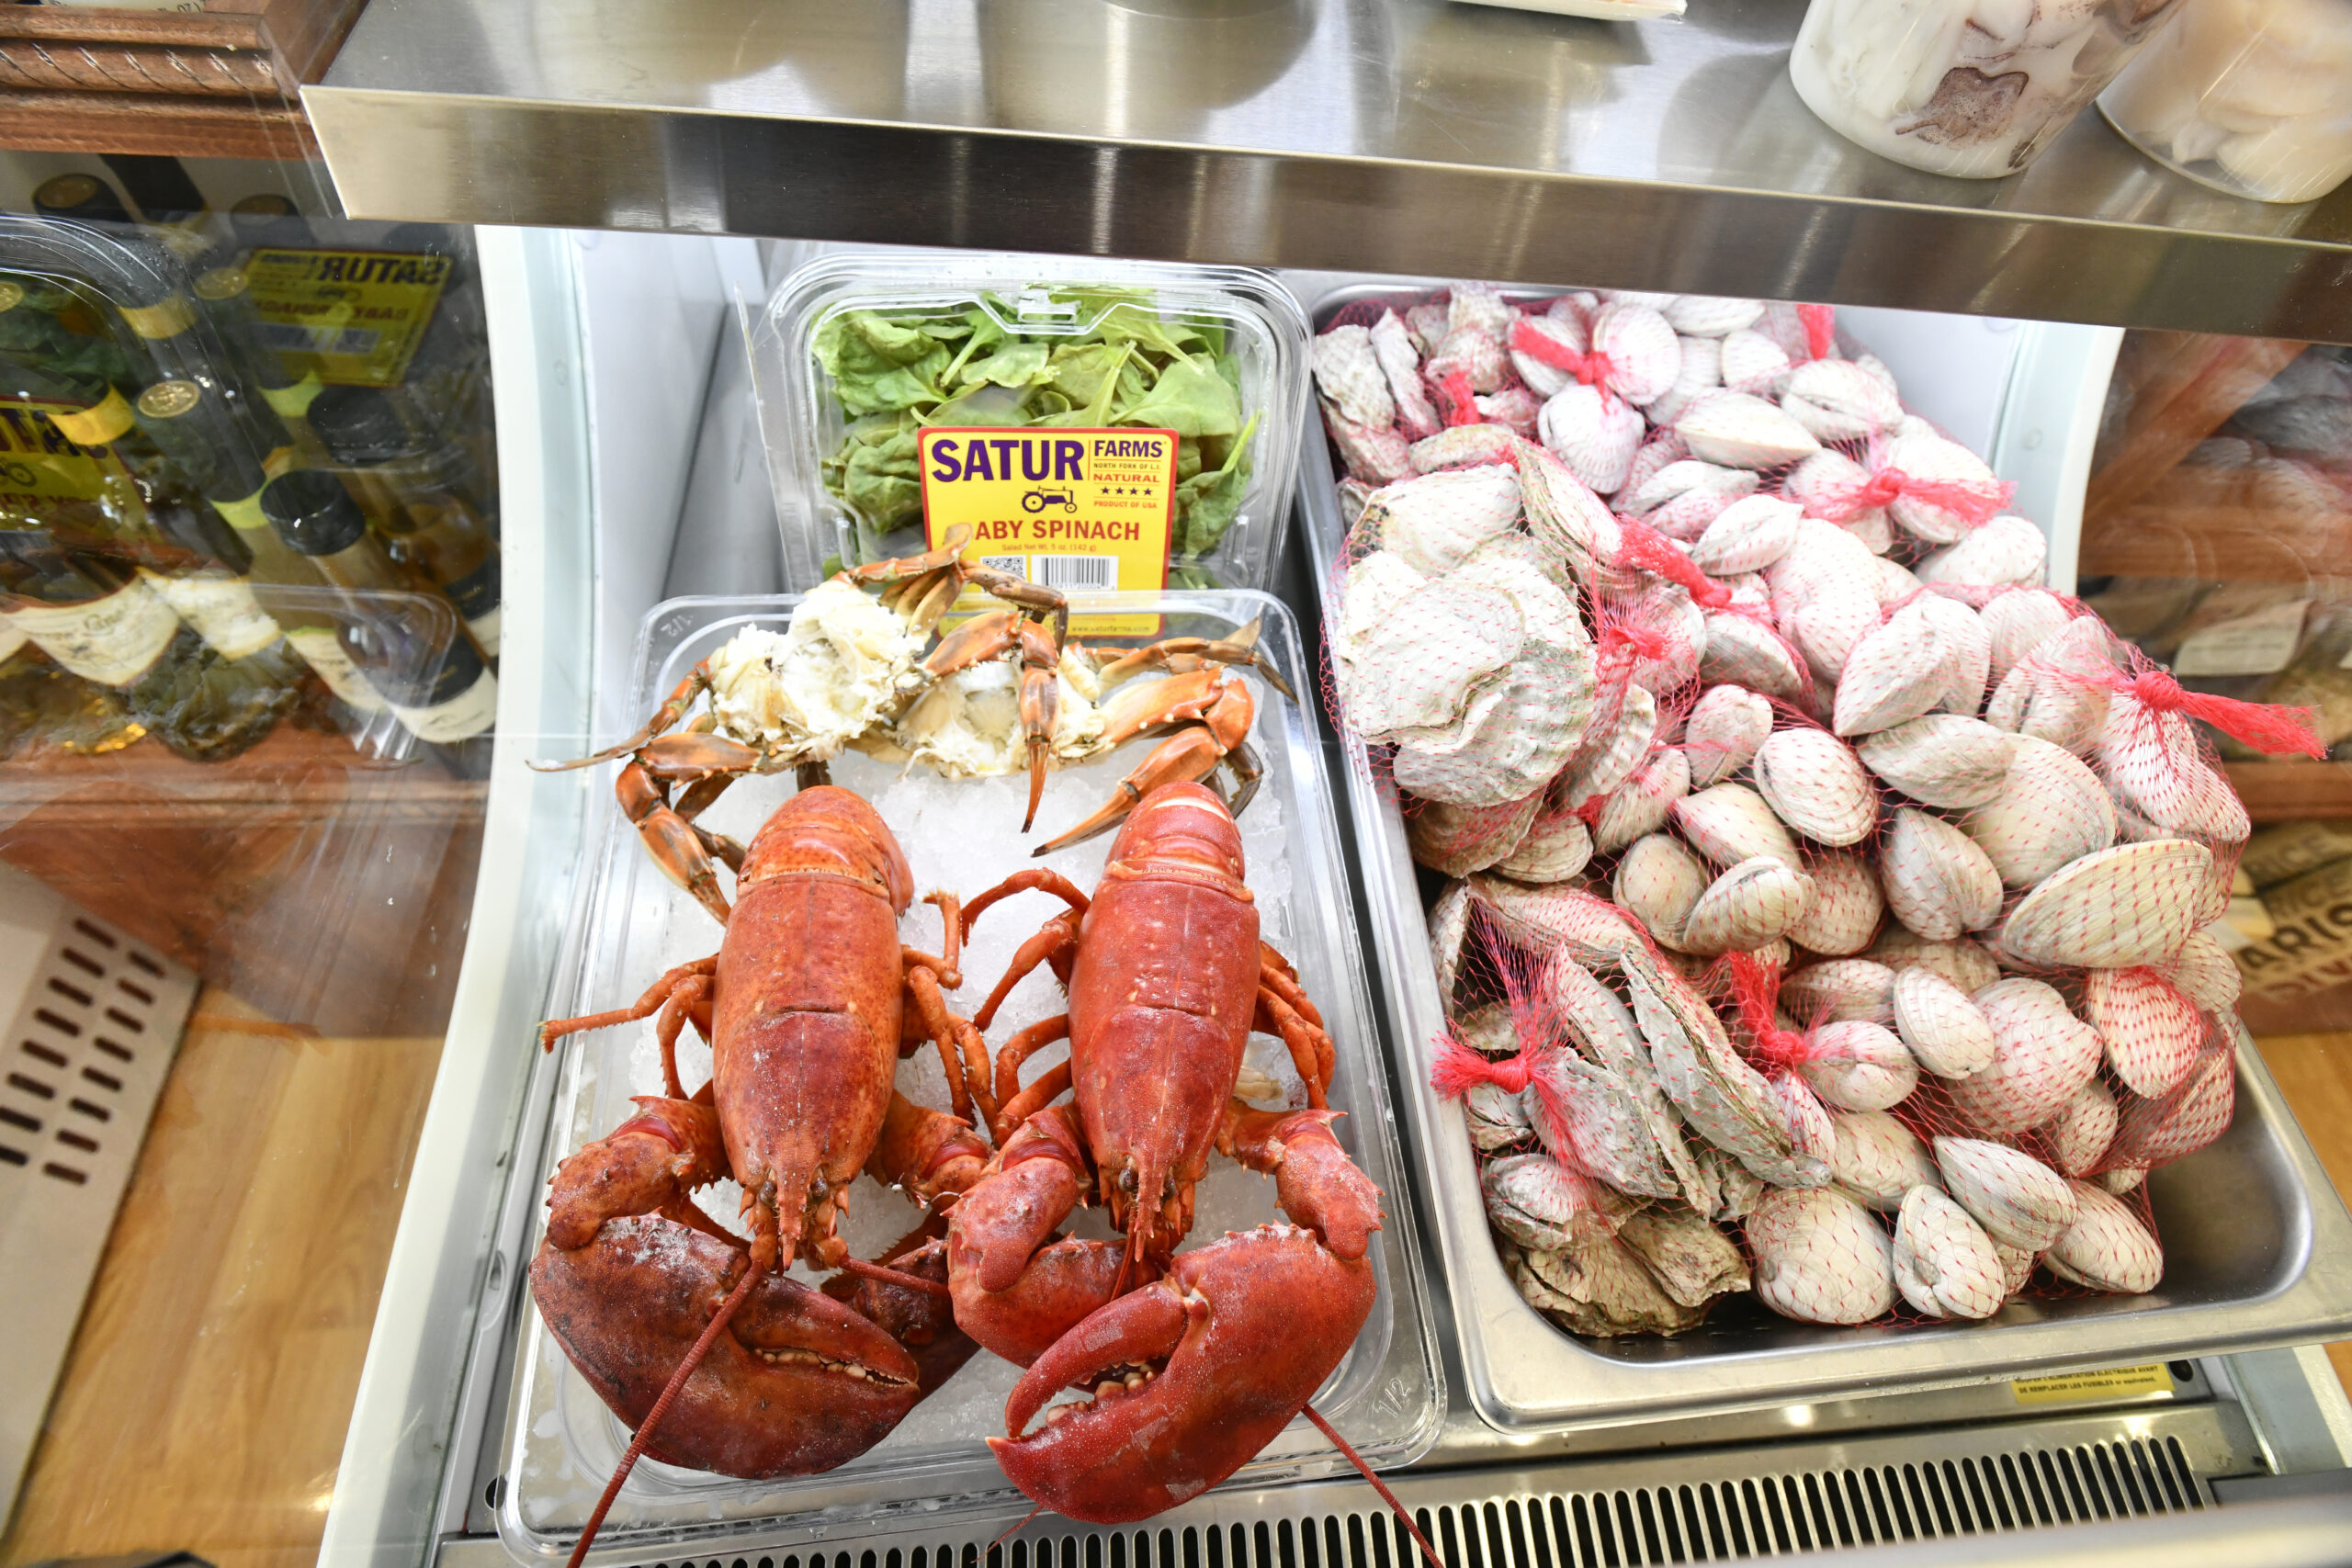 Fishmongers, Restaurants Grapple With Sourcing Seafood Sustainably